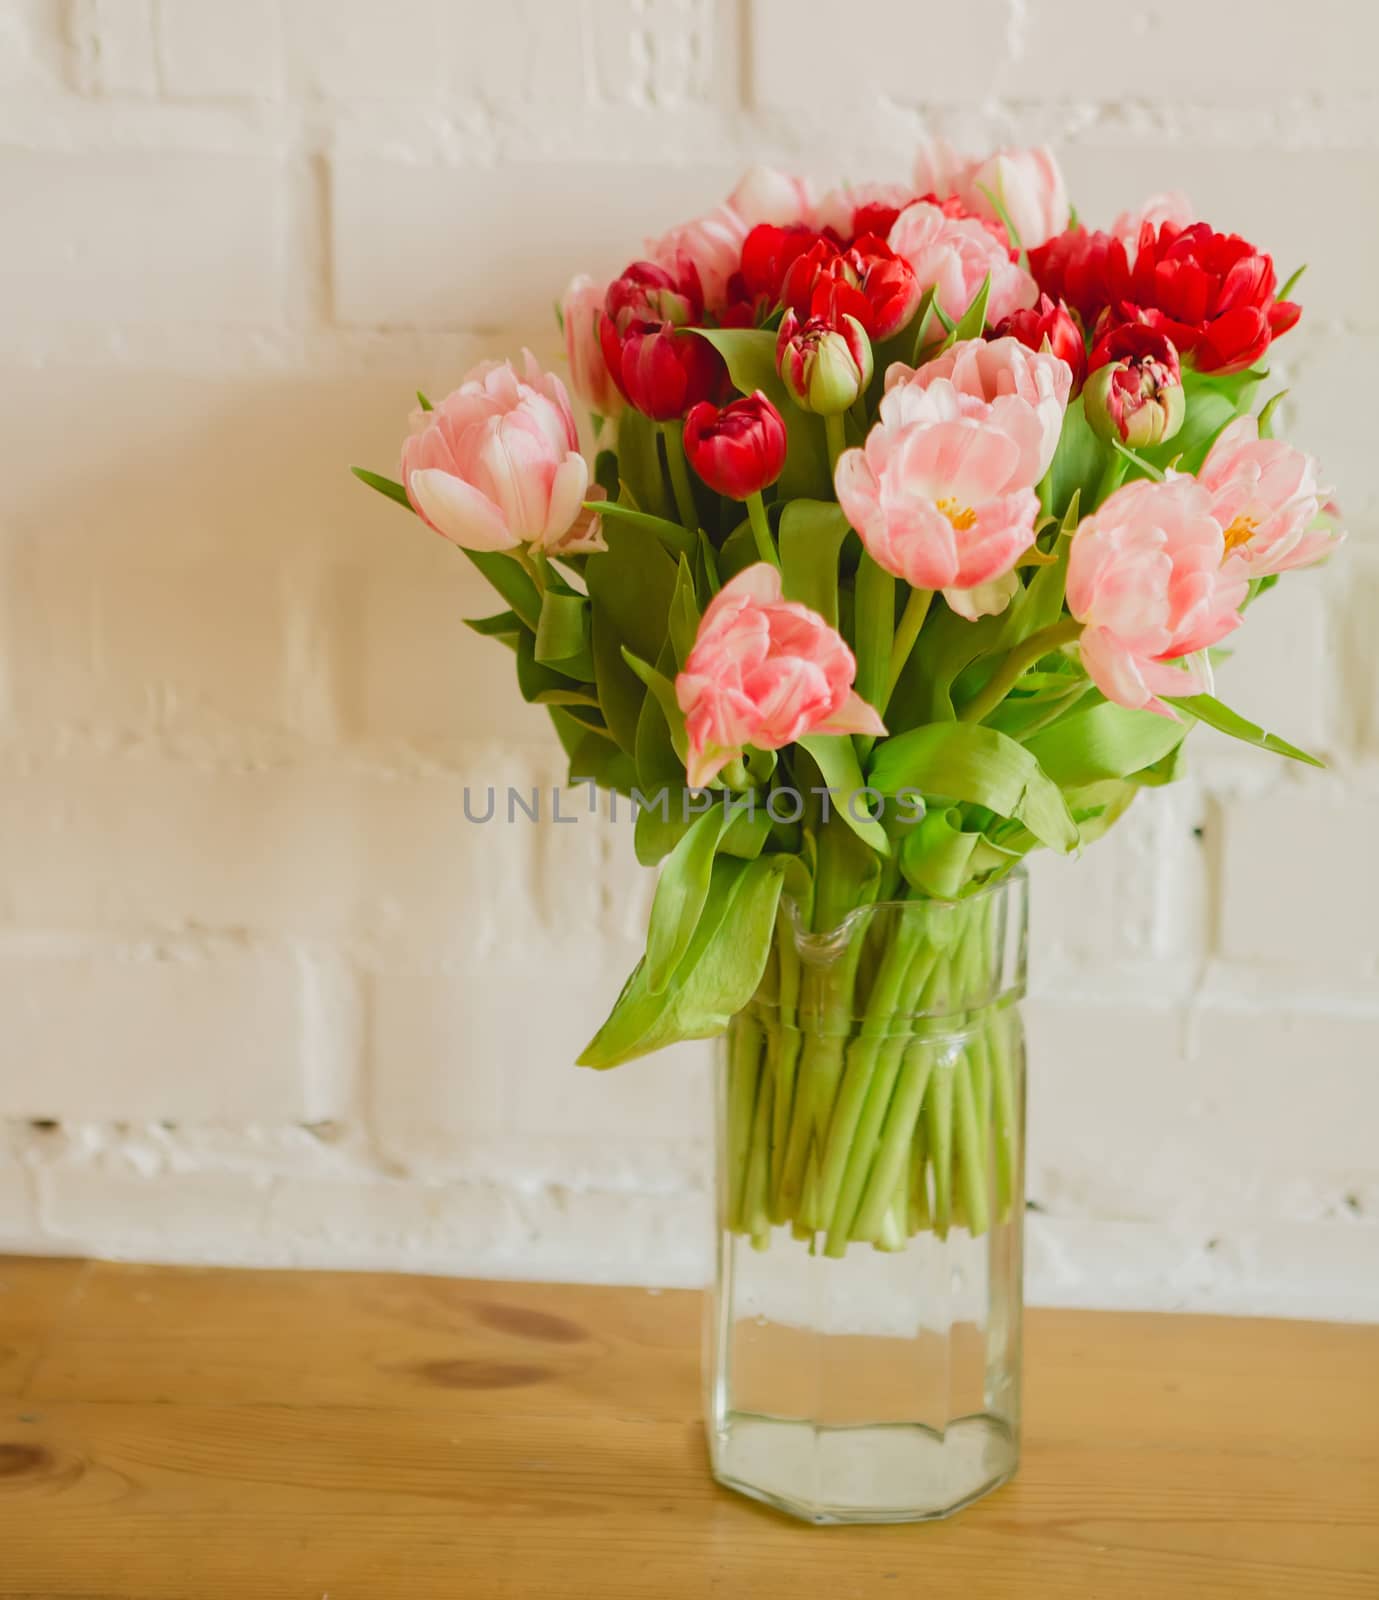 Glass vase with bouquet of beautiful tulips on brick wall background.